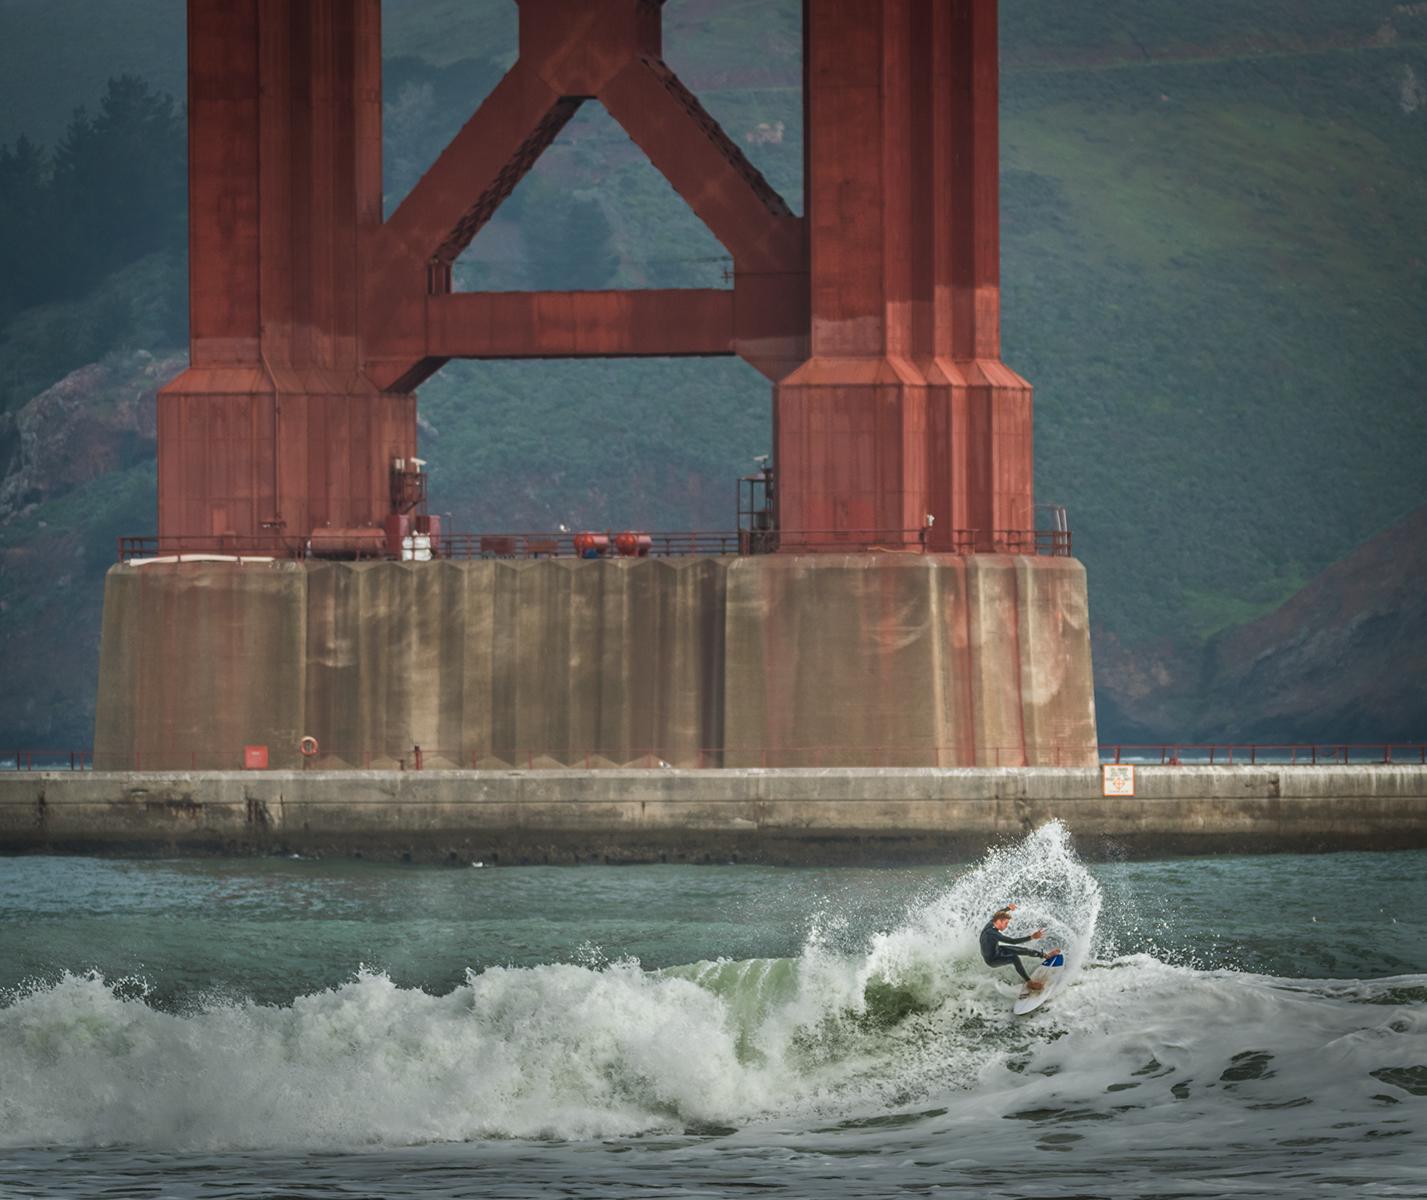 Surfing underneath the iconic Golden Gate Bridge is a picturesque experience for those able to catch a wave.